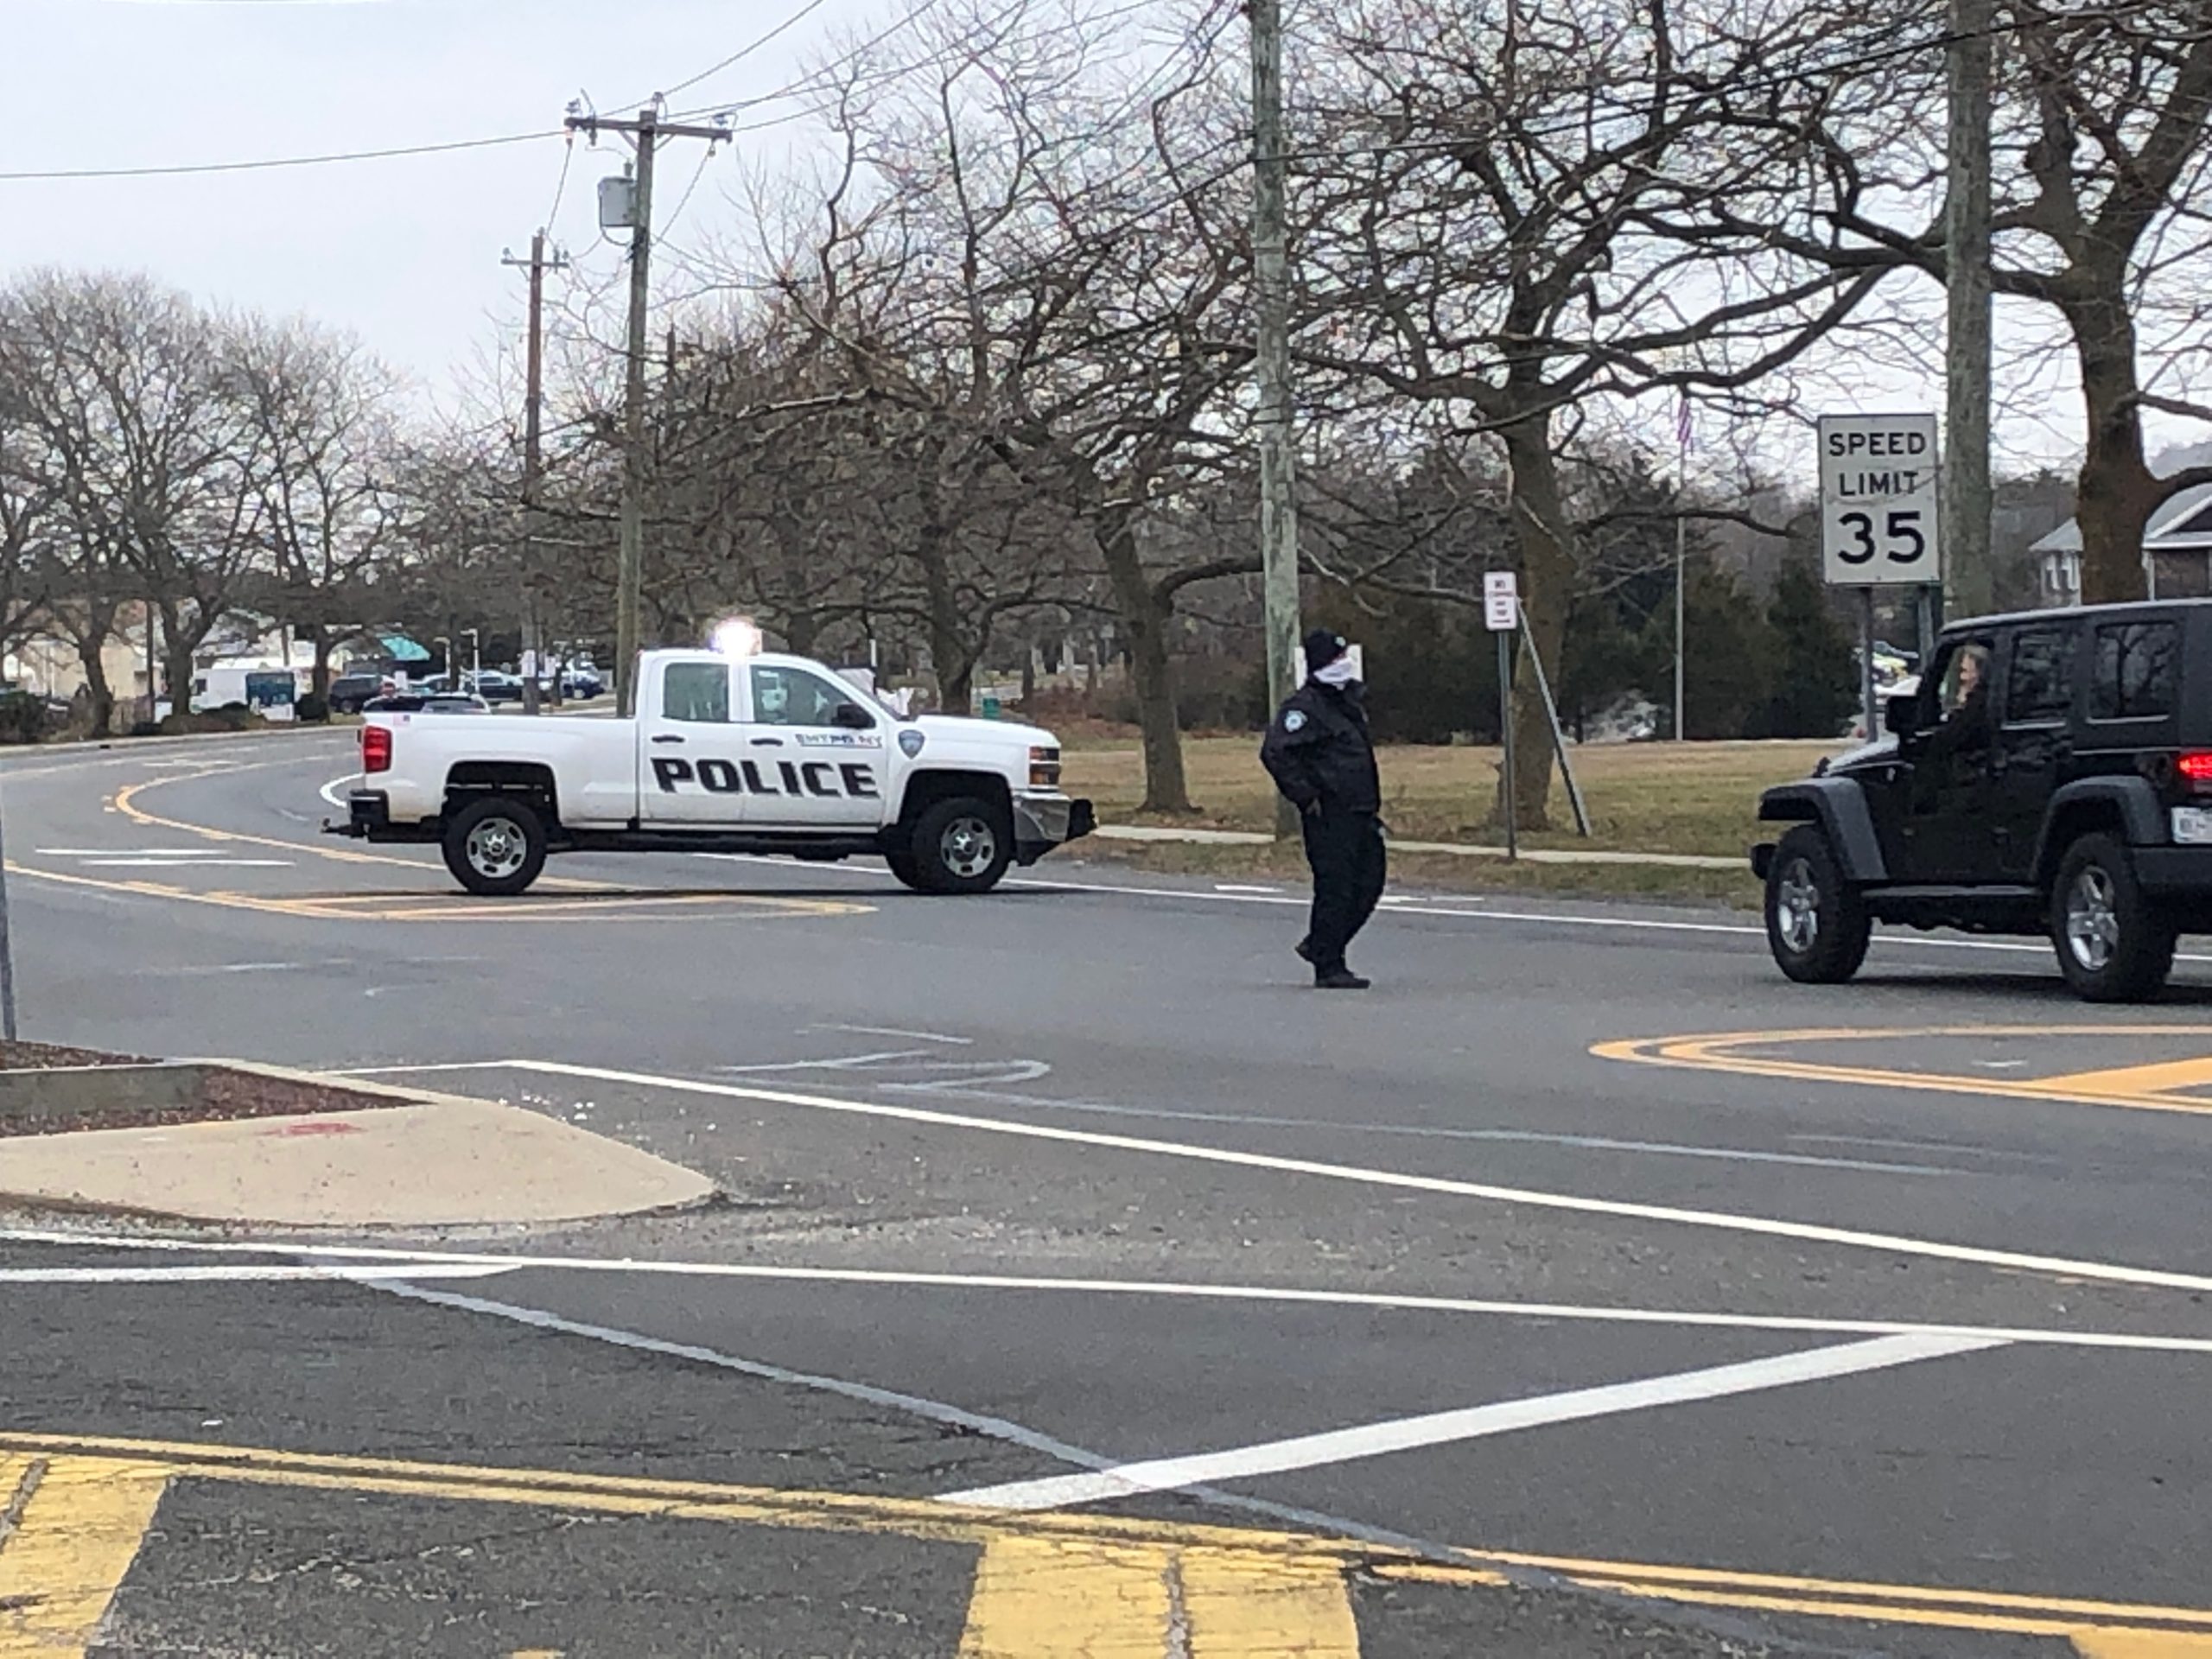 Montauk Highway is closed east of Amagansett as police are searching for a red vehicle involved in a hit-and-run Wednesday morning that sent three people to the hospital with injuries.